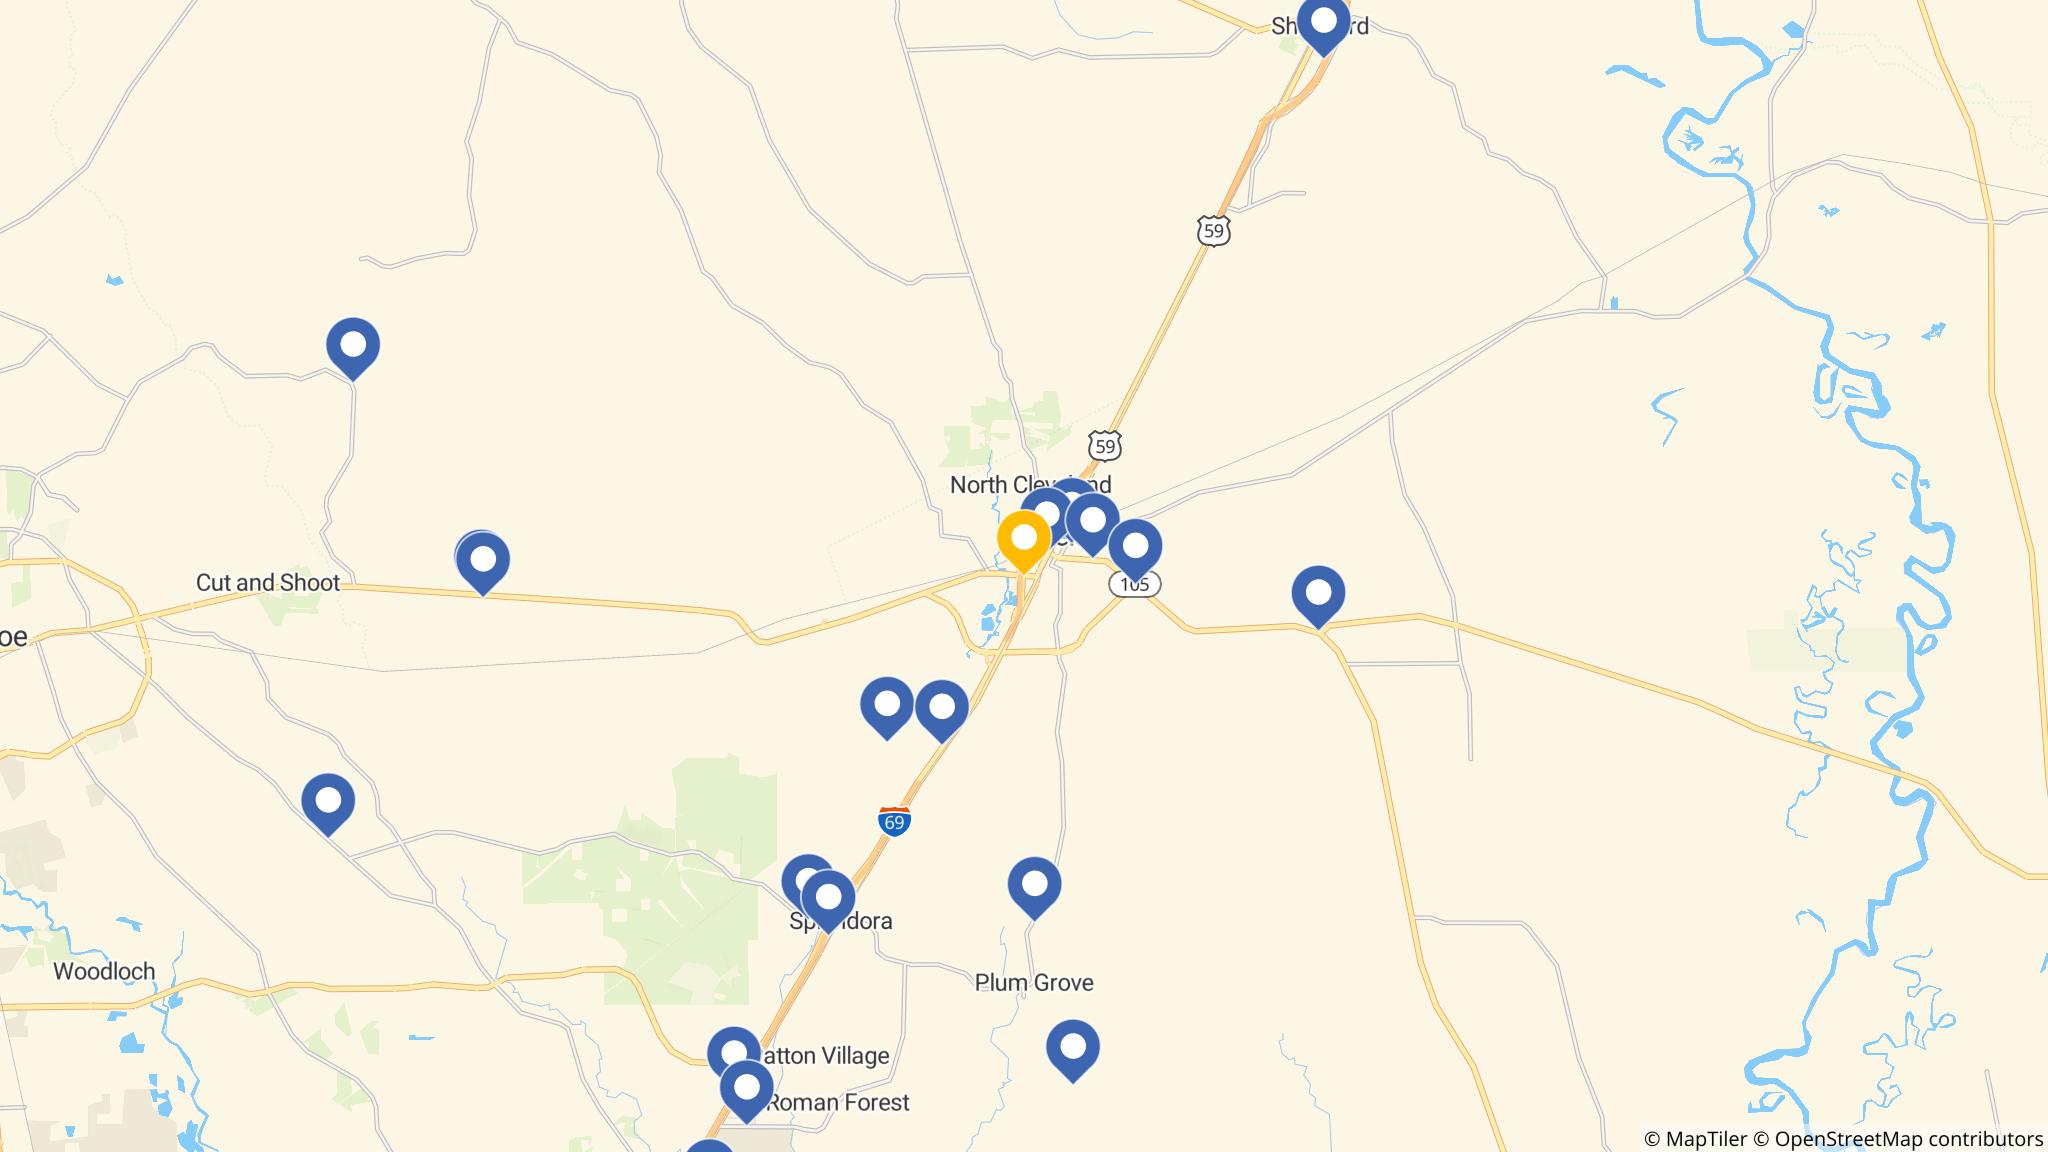 Street map of the ATM area